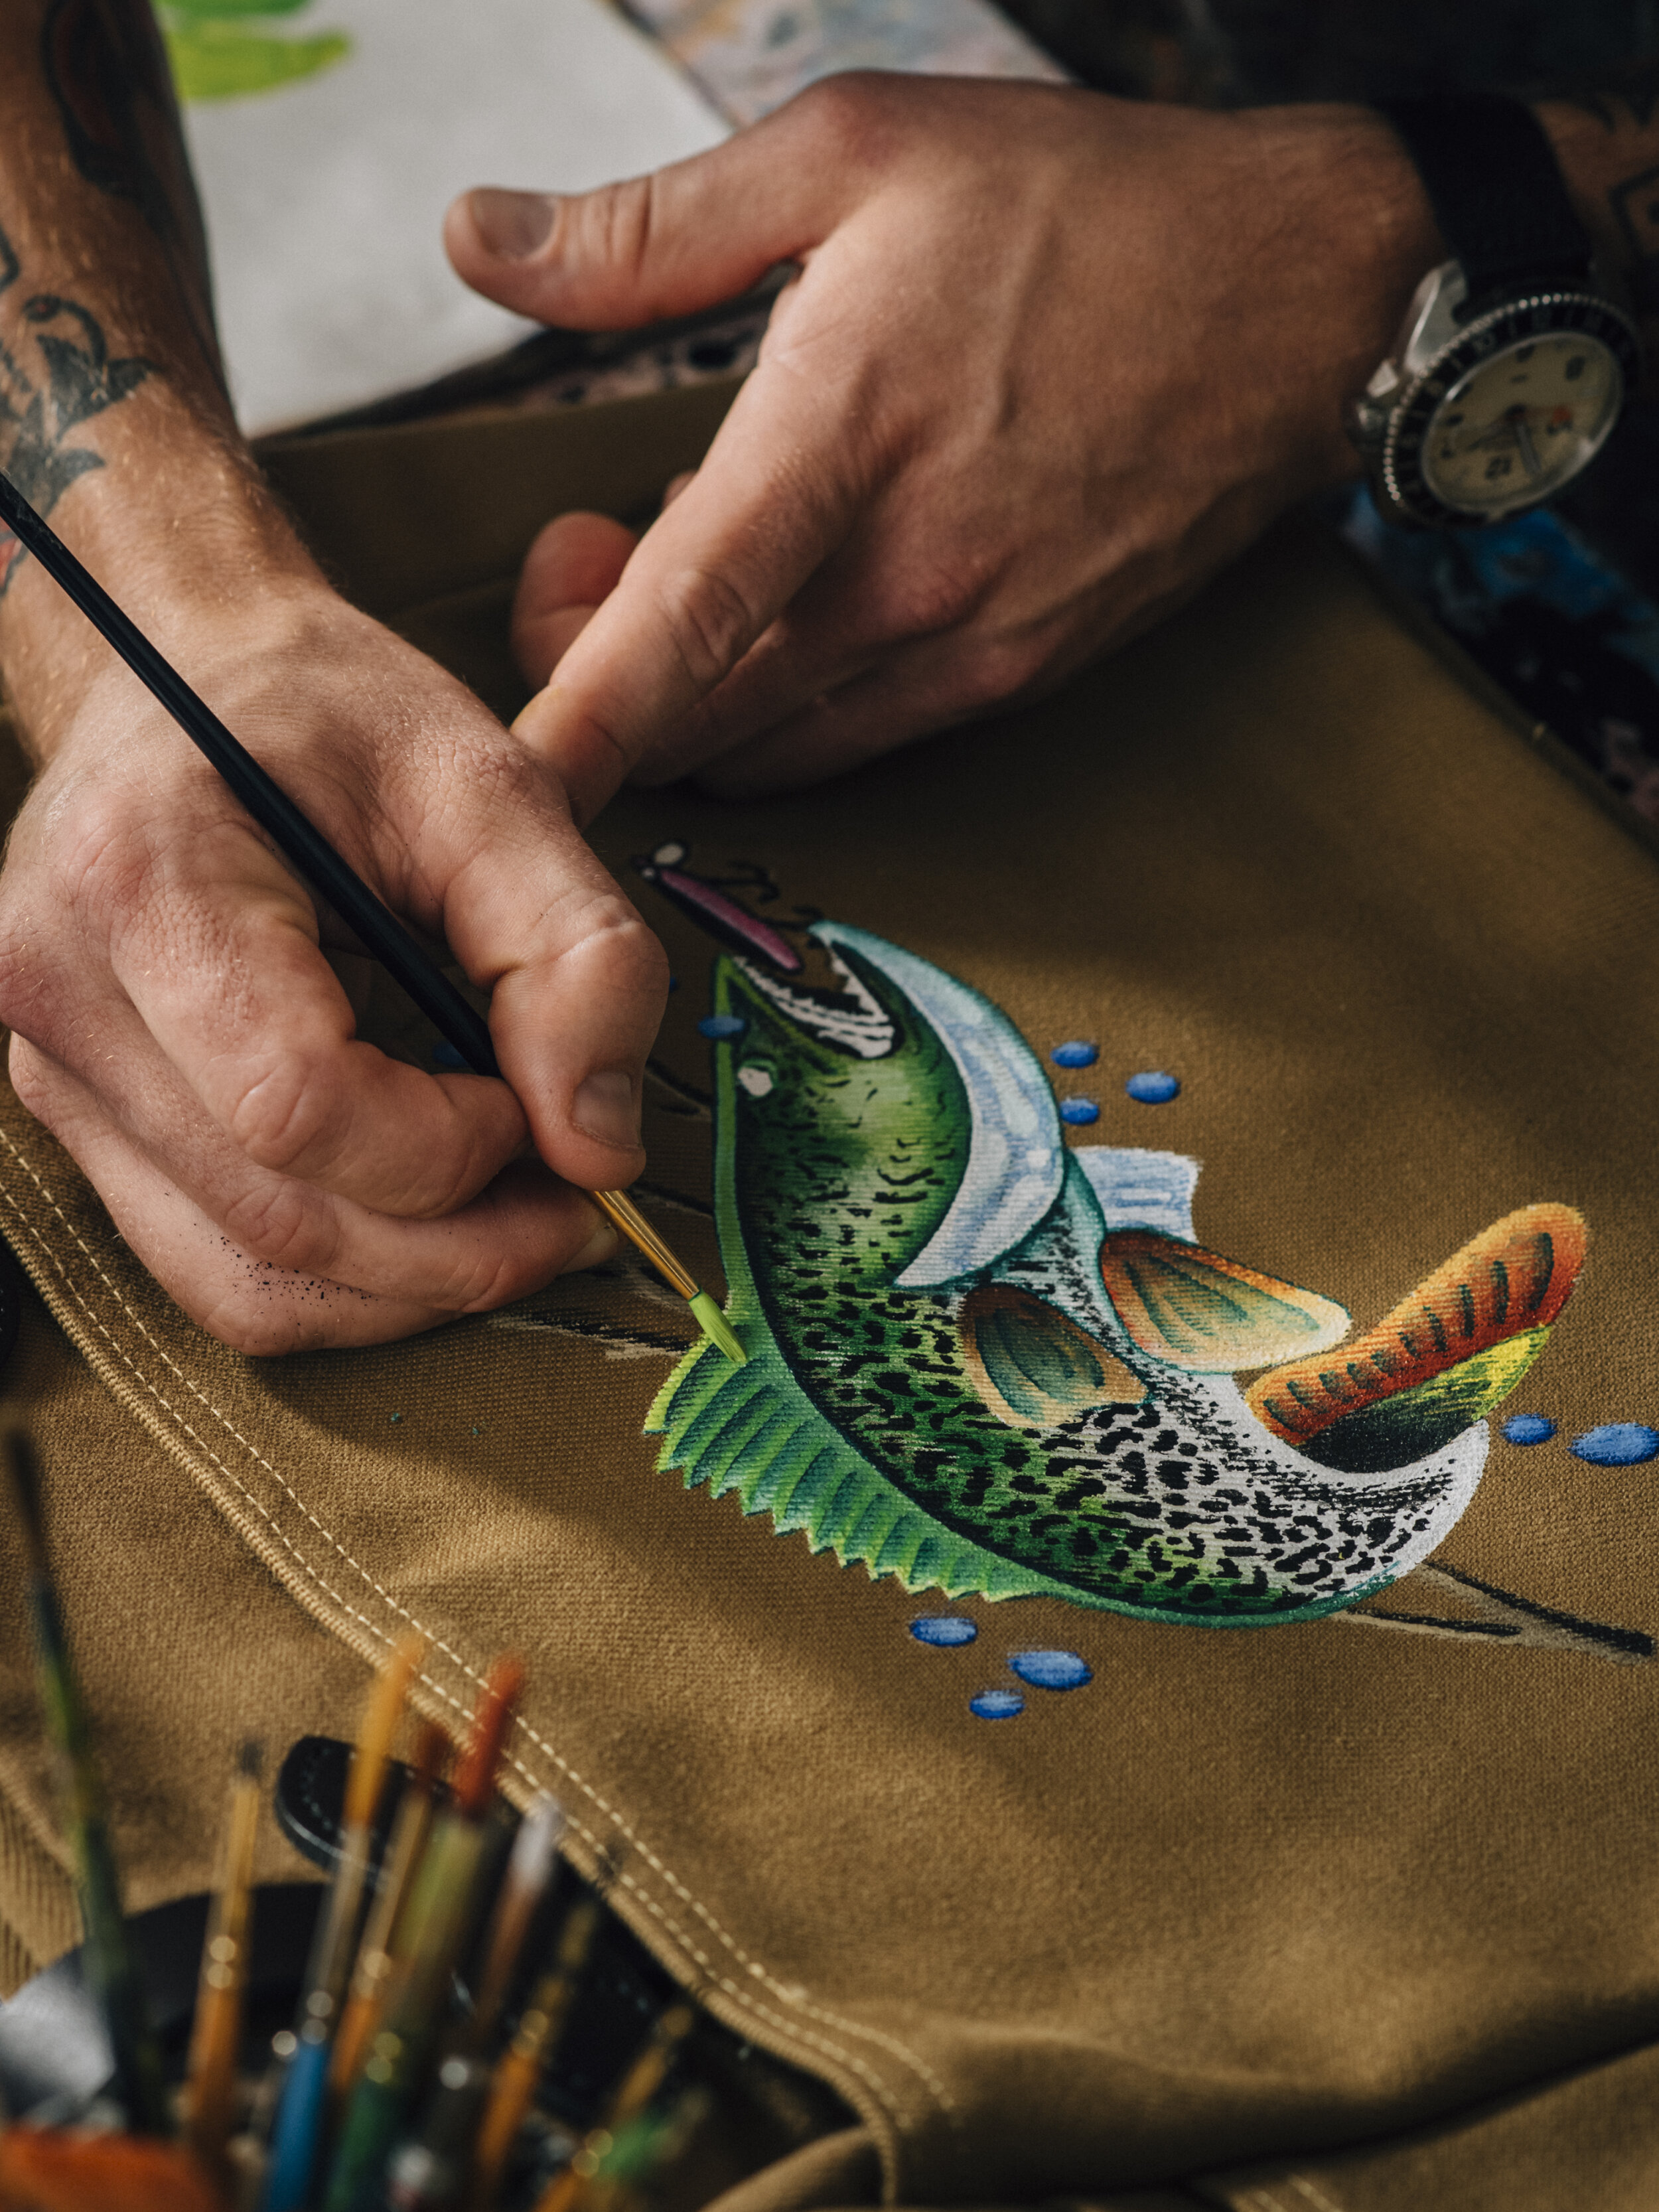  Artist Patric Hanley in collaboration with Filson 